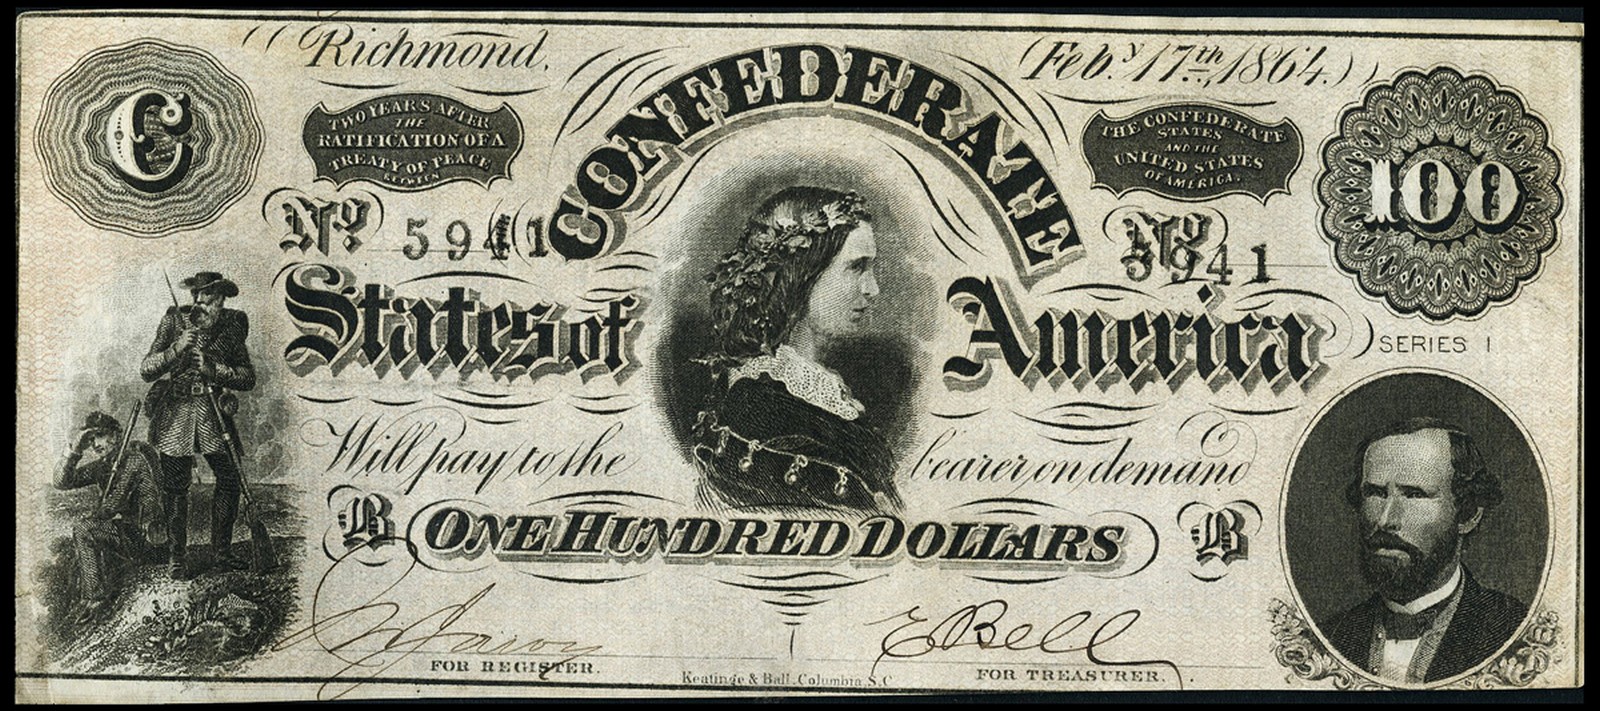 WORLD BANKNOTES, United States of America, Confederate States, One Hundred Dollars, 17 February